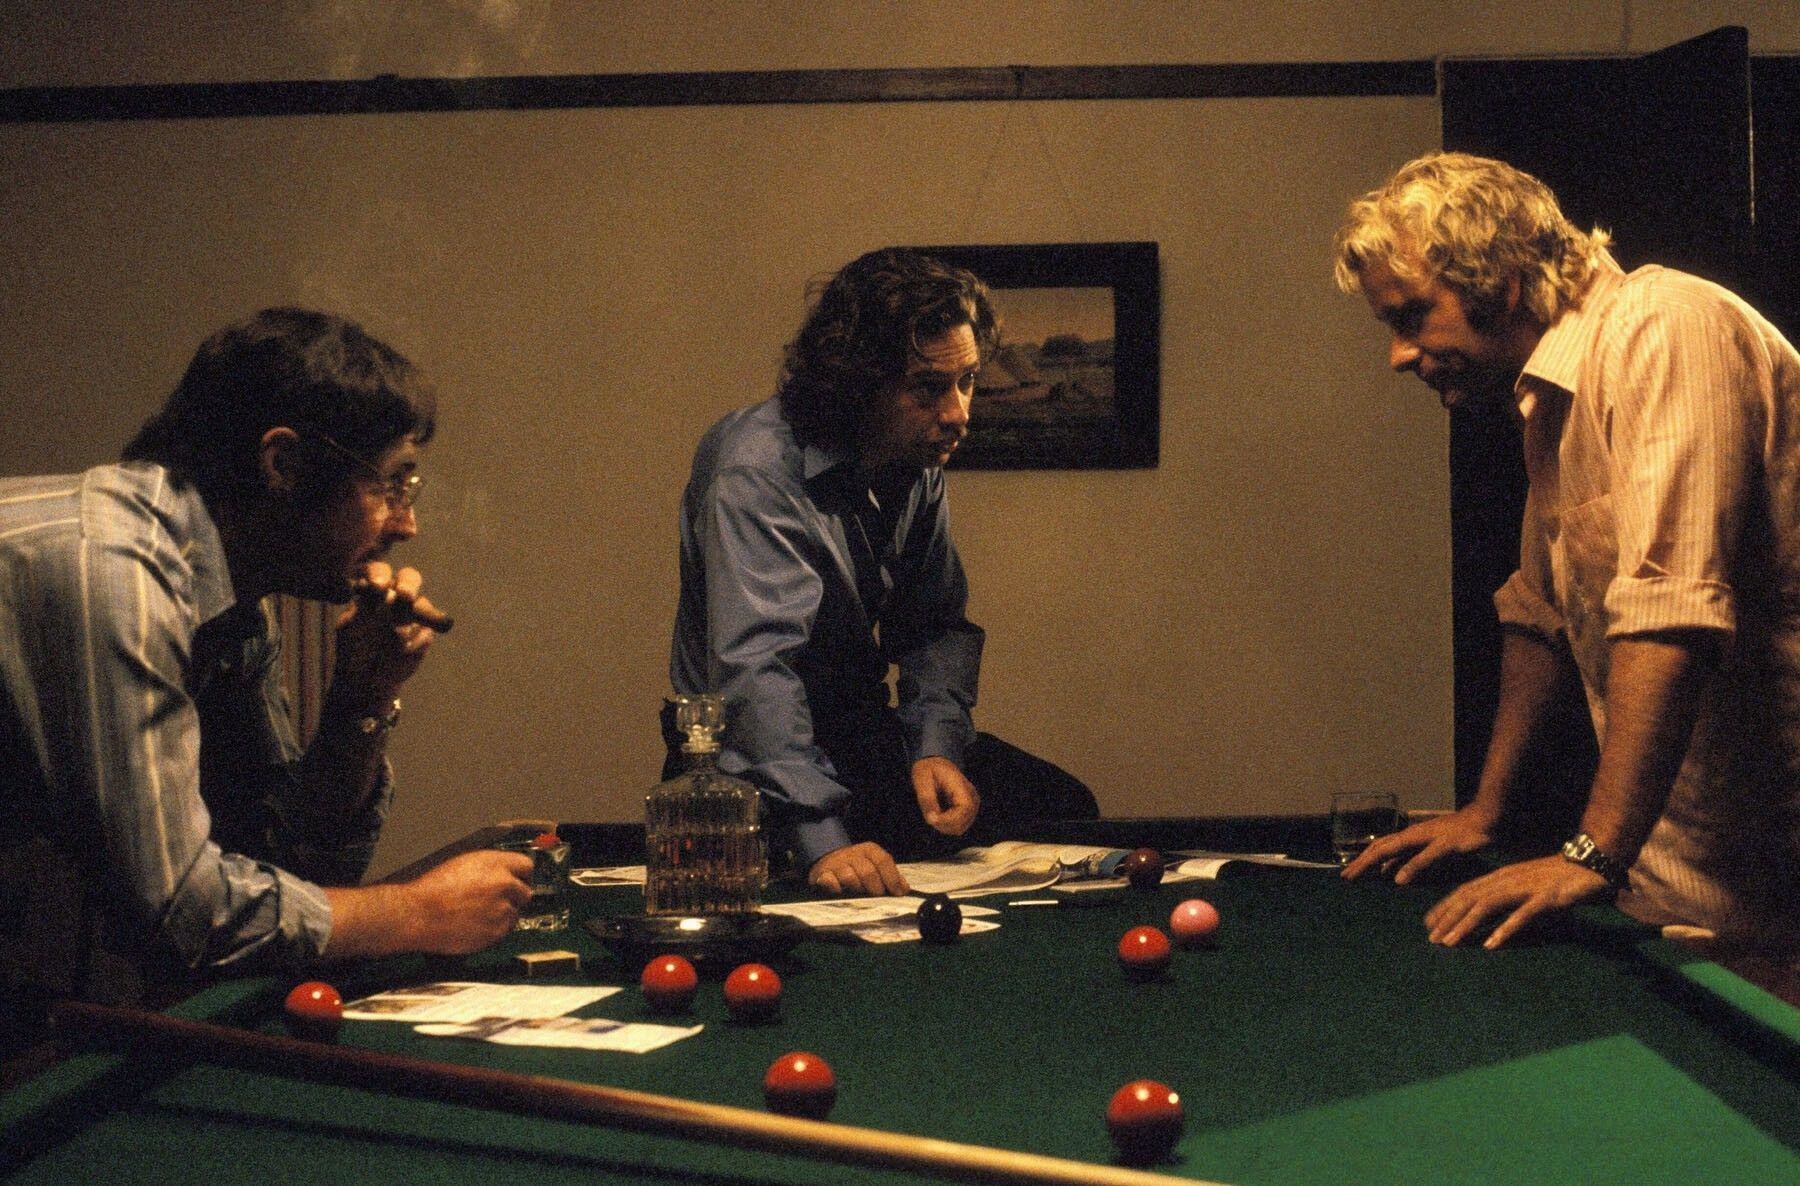 Three middle-aged fugitives discuss their next criminal move atop a pool table